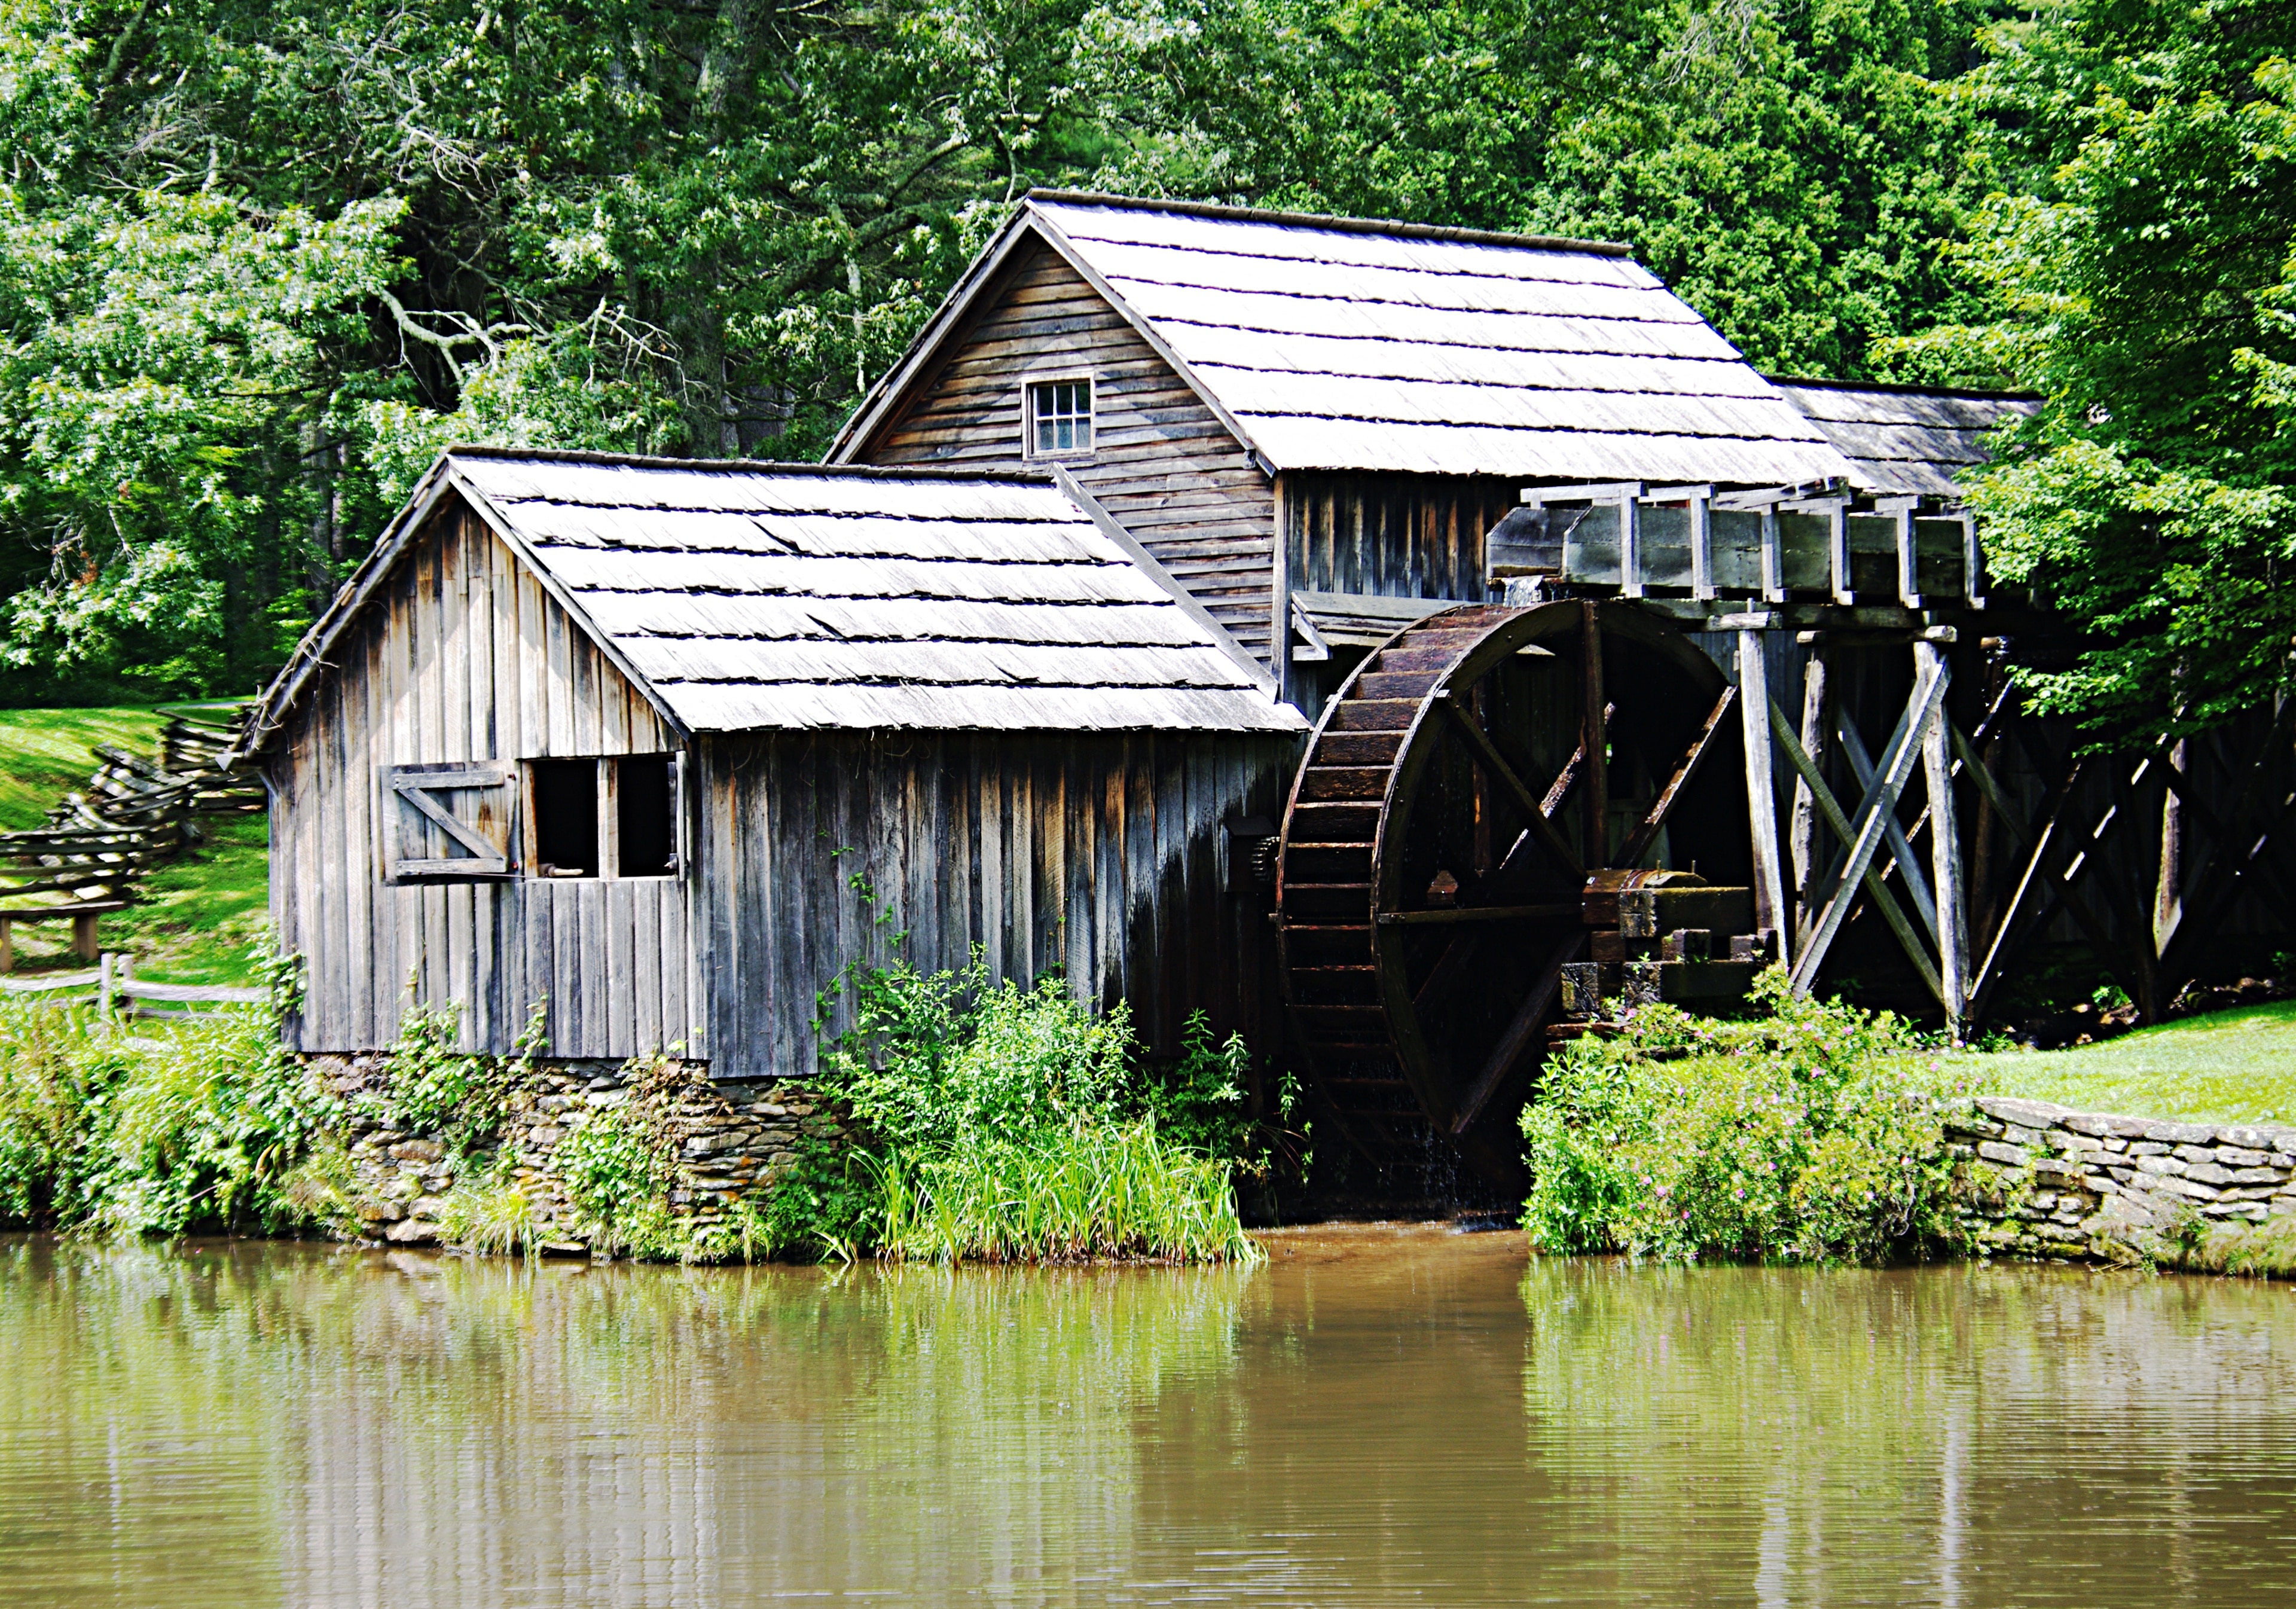 Old grist mill along the Blue Ridge Parkway.